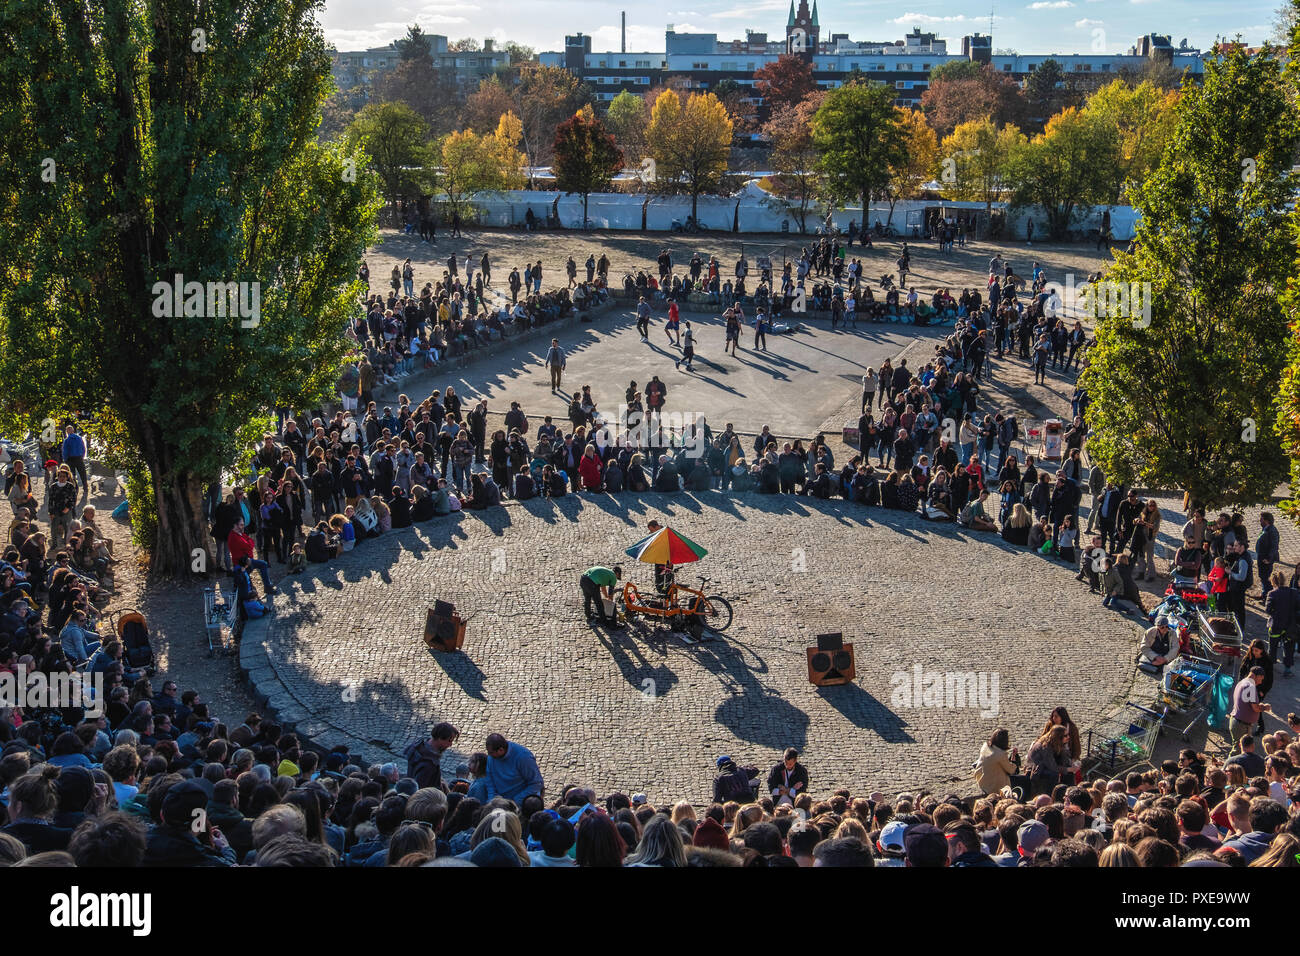 Berlin, Germany. 21st October 2018. The popular  Mauerpark park was crowded as Berliners & tourists enjoy  the last of the warm autumn weather. People enjoy entertainment at the 'bear pit' and the basket ball field is in use.credit: Eden Breitz/Alamy Live News Stock Photo